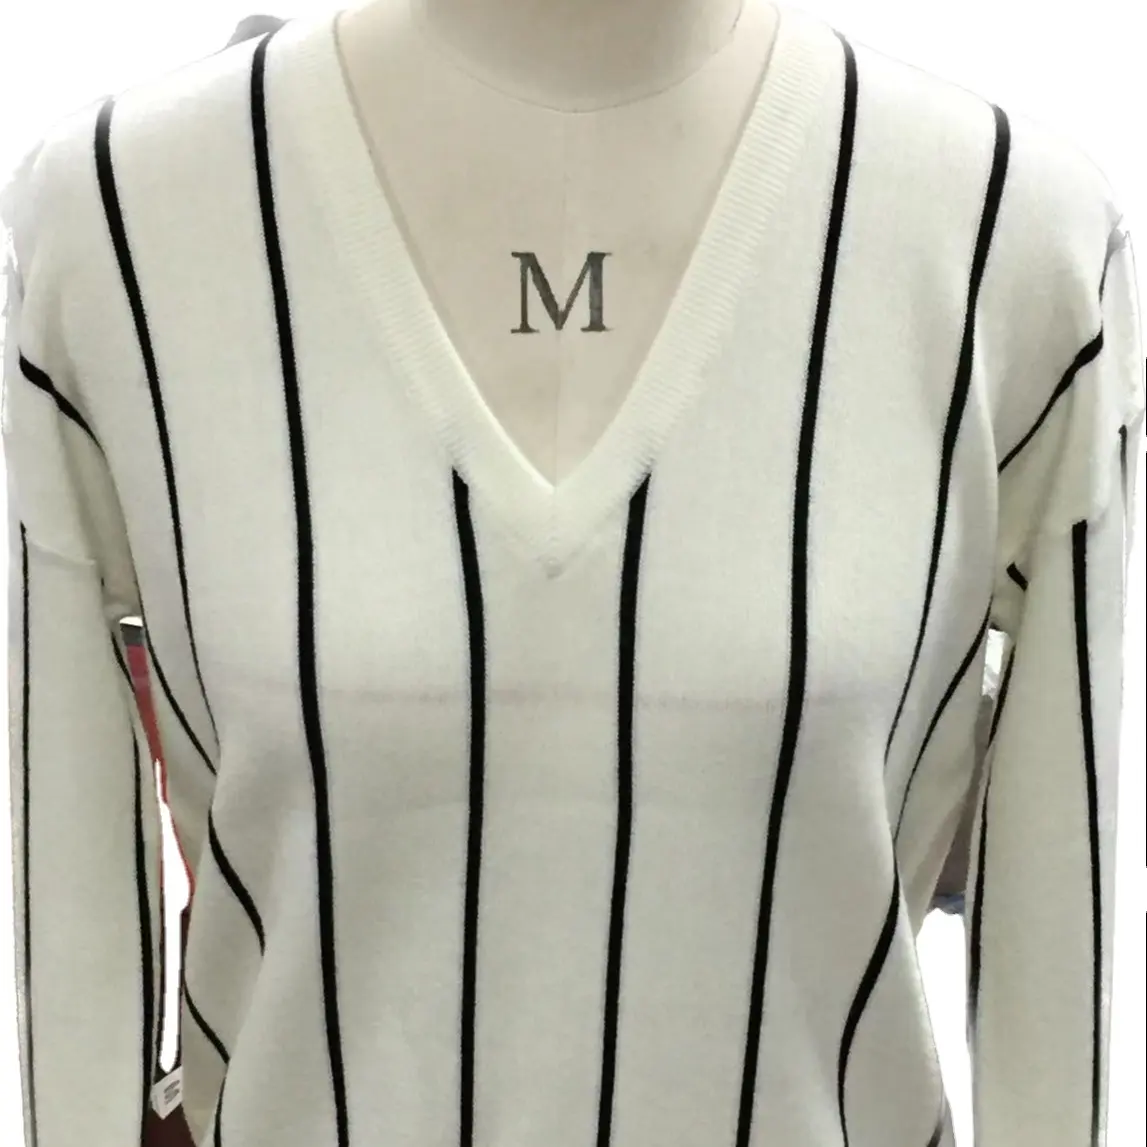 2023 OEM ODM Factory Women Ladies Vertical Stripe Computer Knit V Neck Pullover Custom Casual Hot Fashion Best Selling Sweater